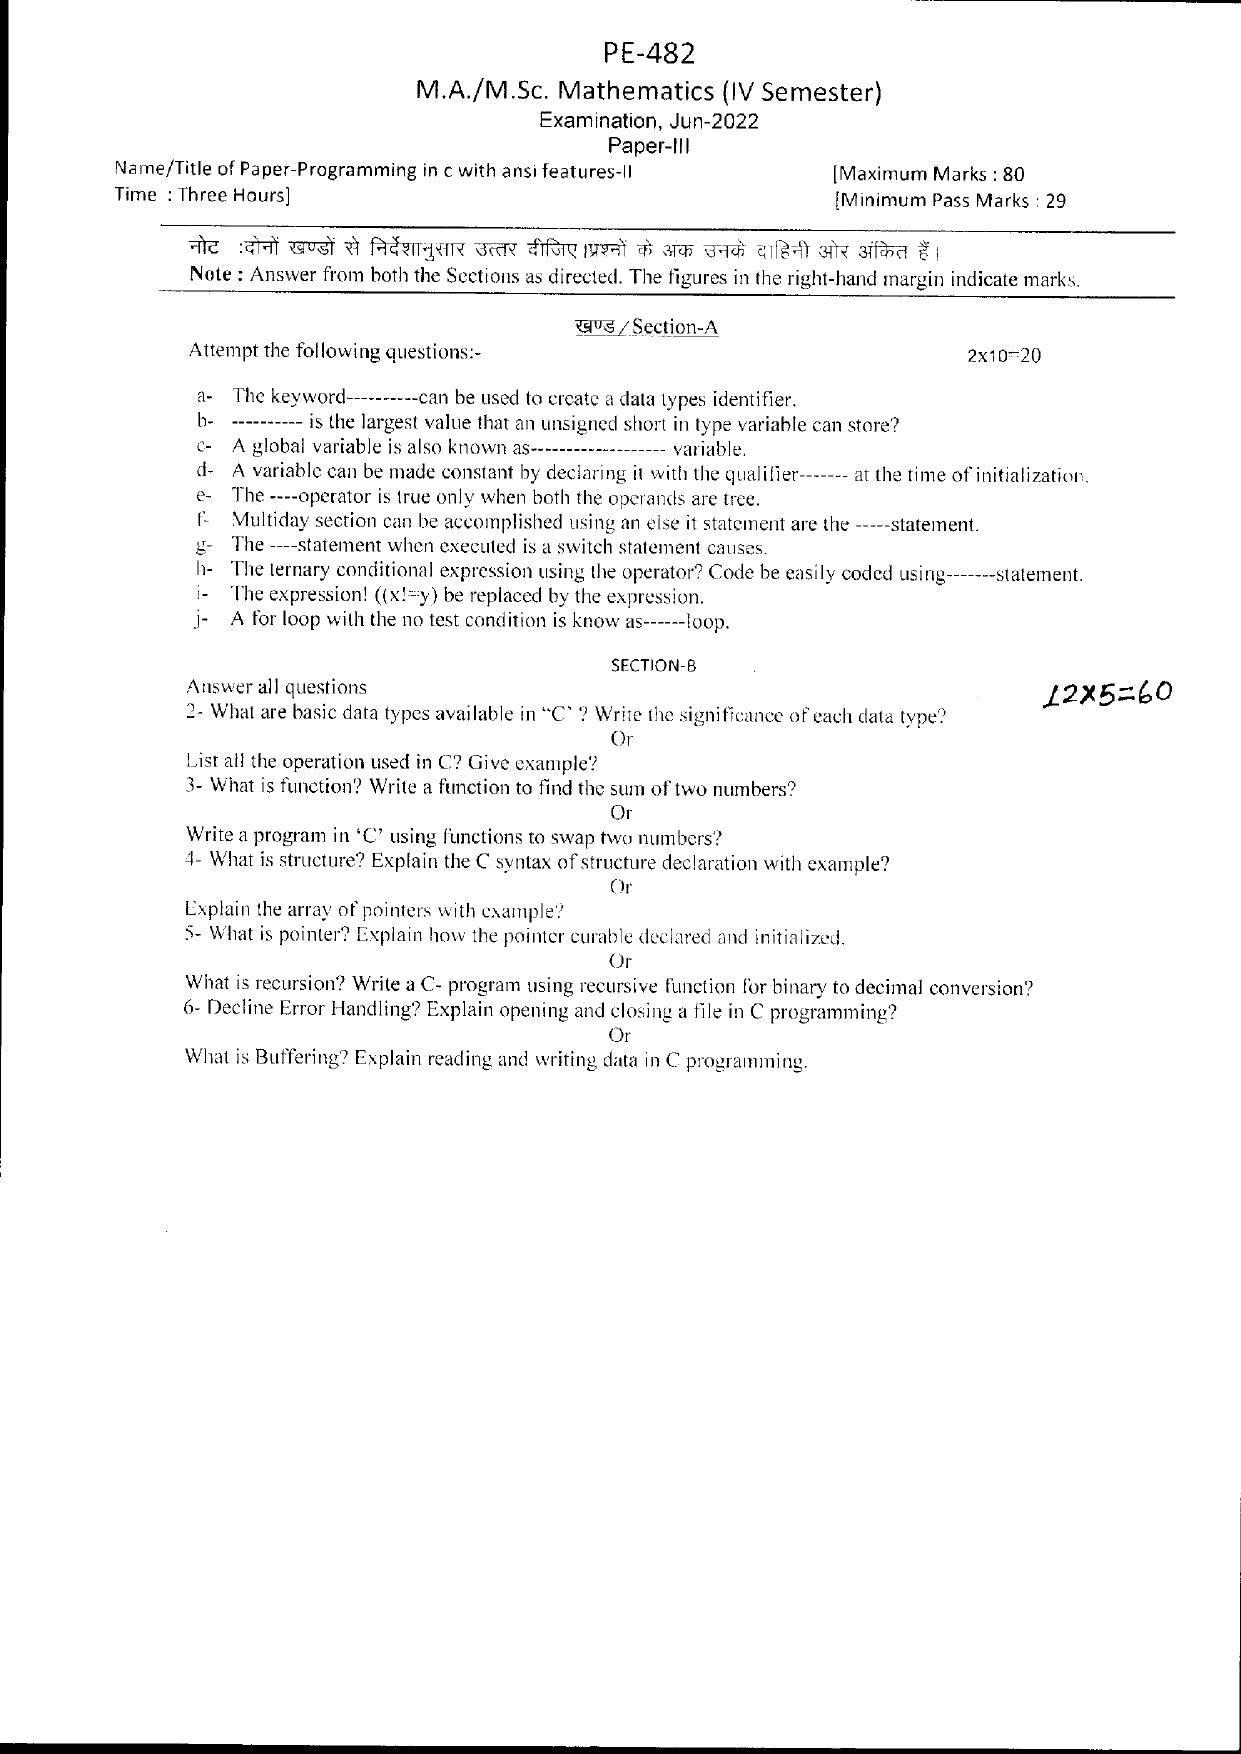 Bilaspur University Question Paper June 2022:M.A./M.Sc. Mathematics(Fourth Semester) Programming In C With Ansi Feature -II Paper 1 - Page 1